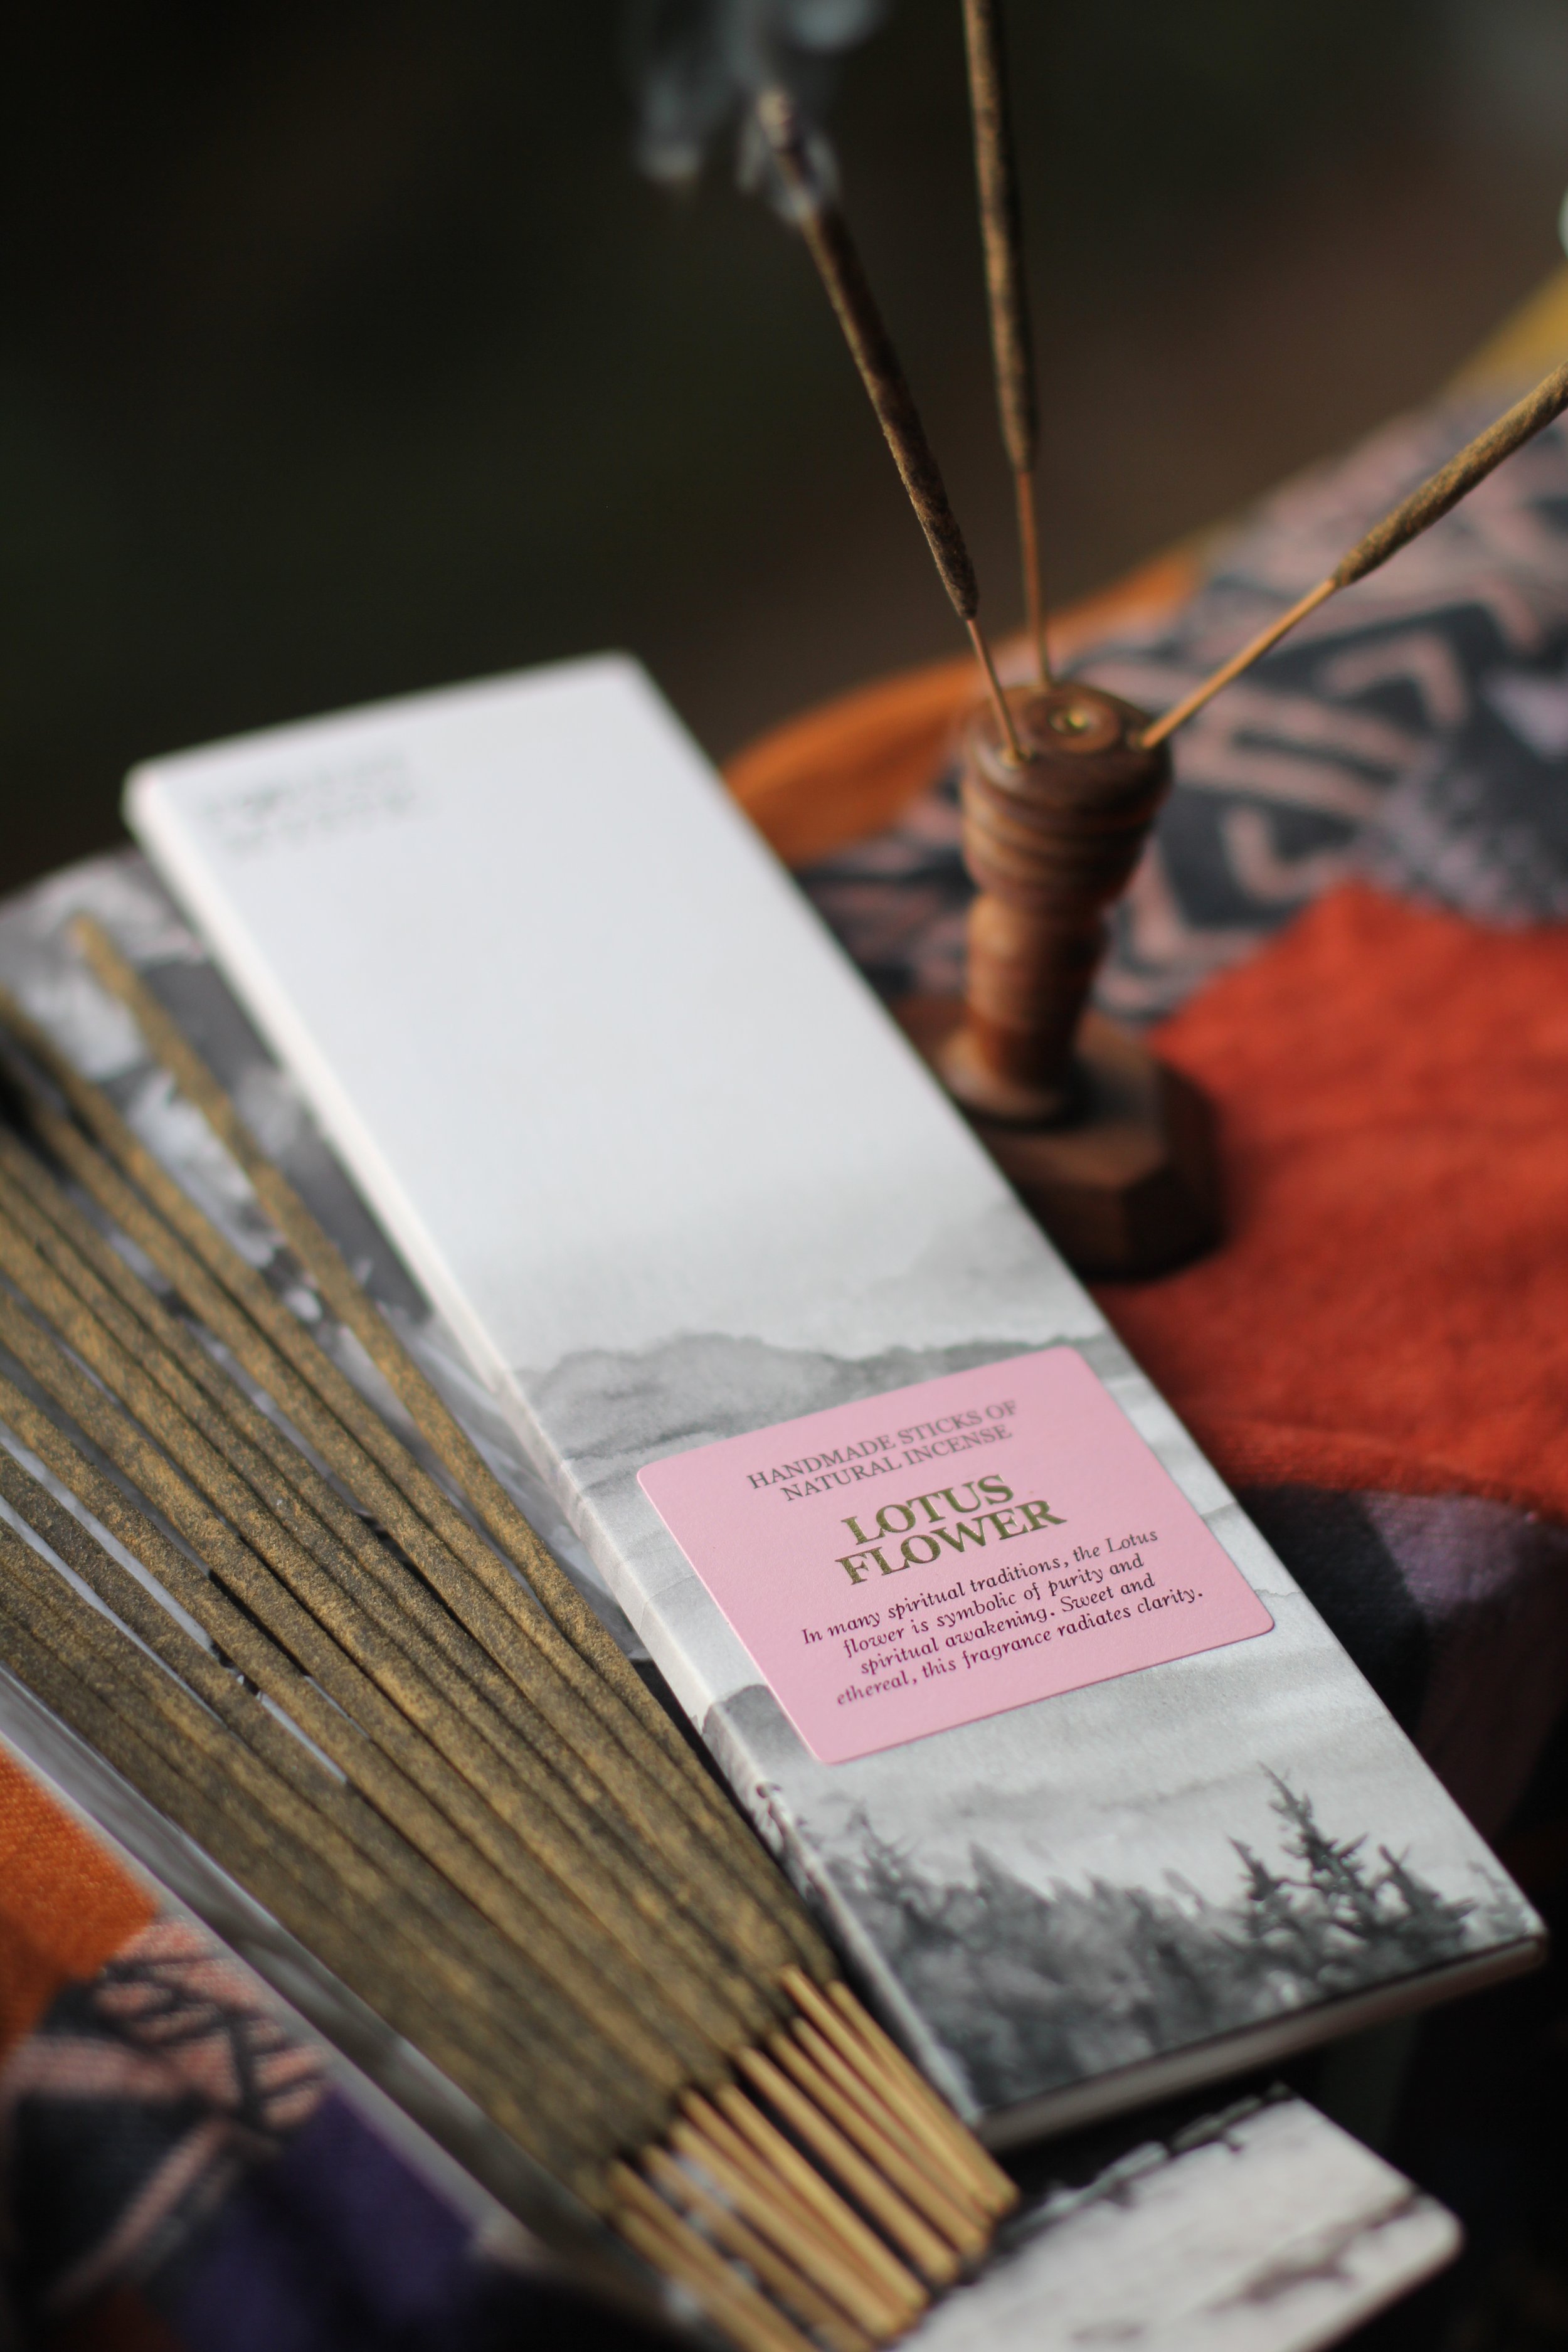 Pack of Lotus Flower scented incense sticks open on table